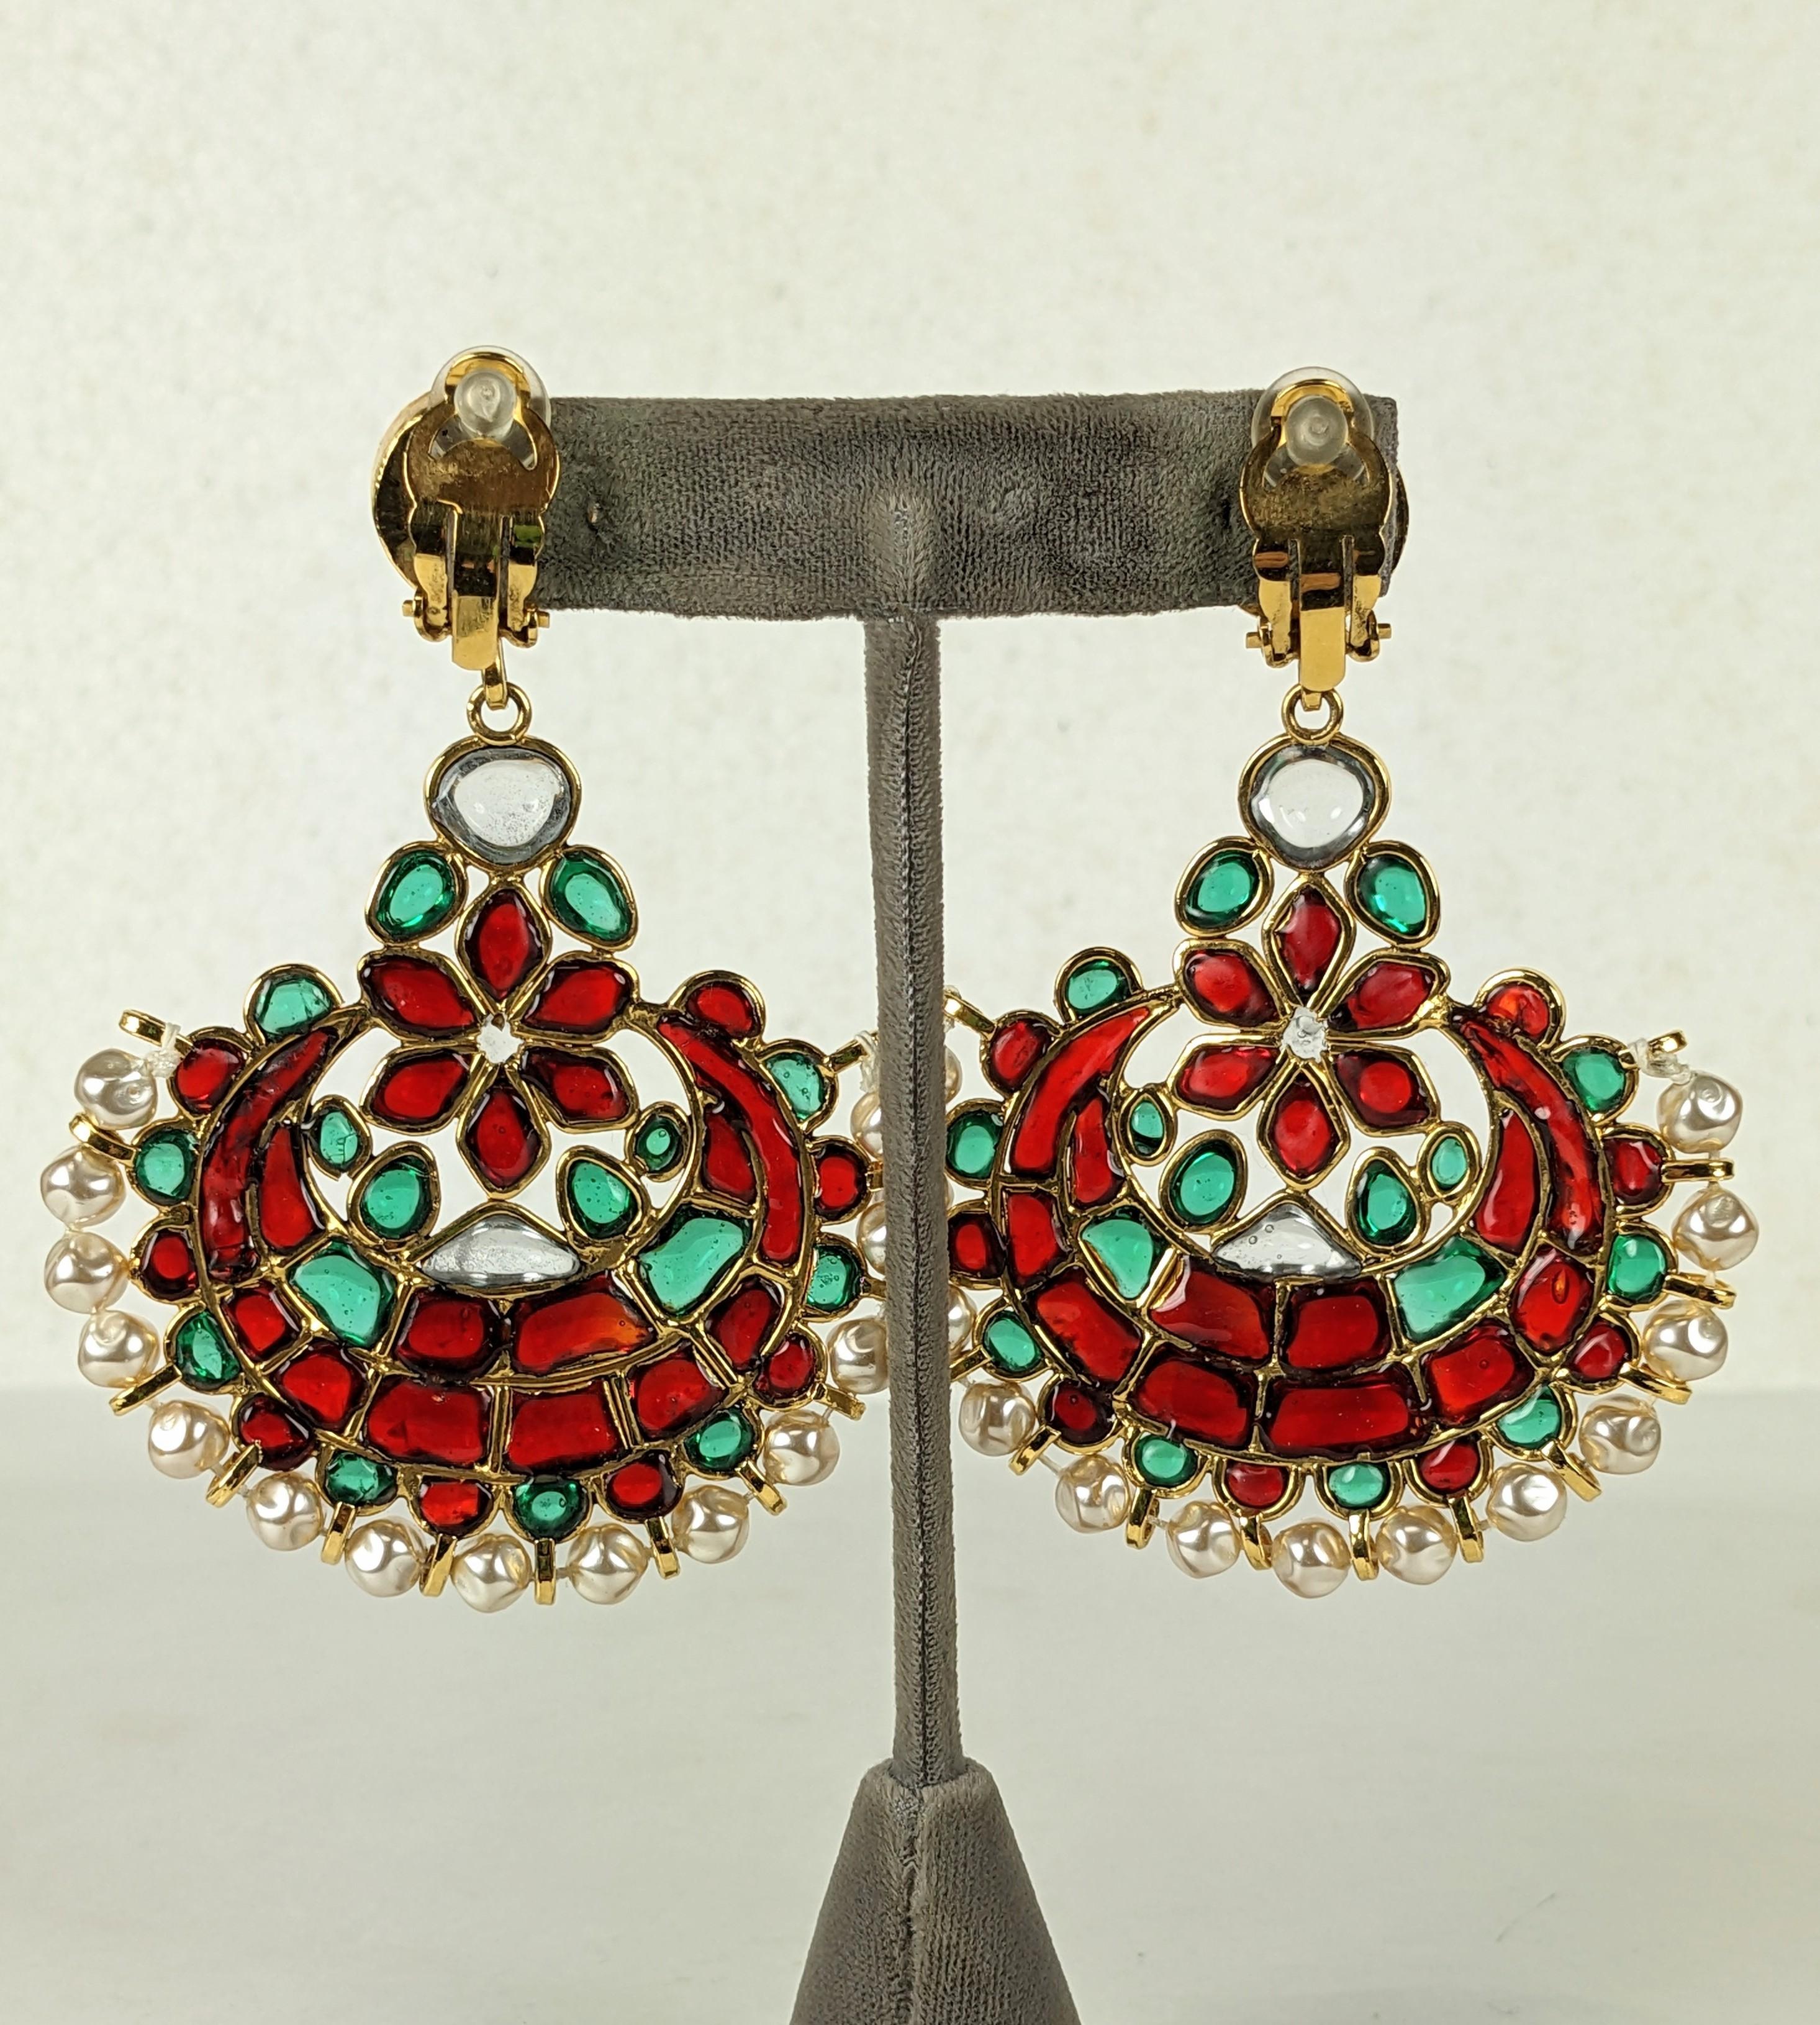 Maison Gripoix for Chanel Anglo Indian Pendant Earrings In Excellent Condition For Sale In New York, NY